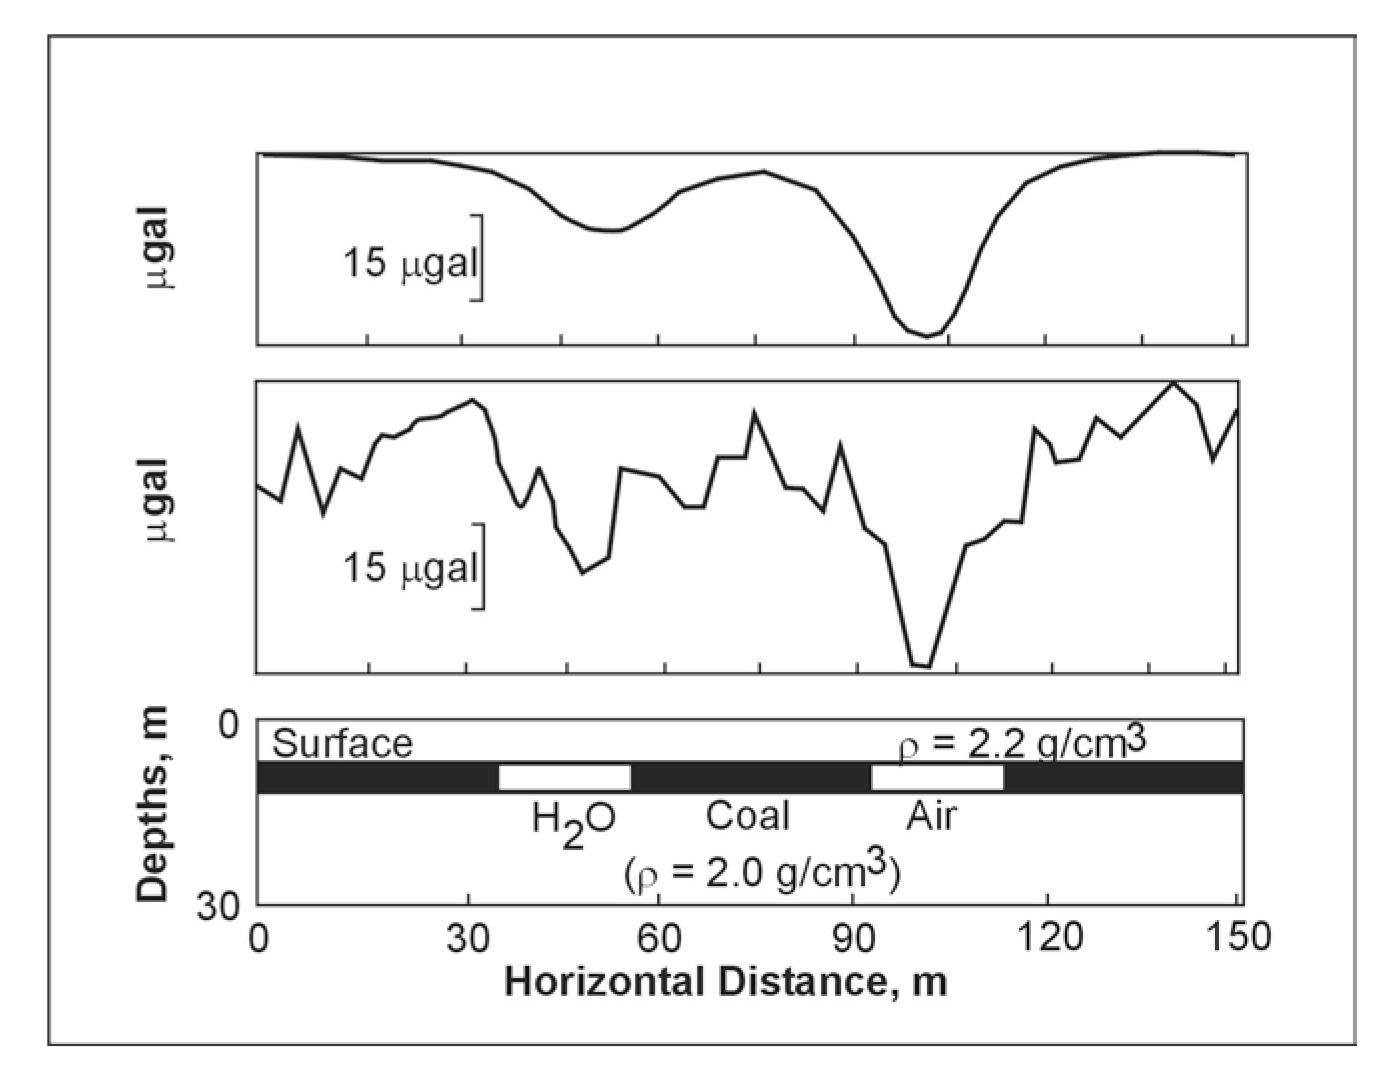 Geologic model (bottom) including water- and air-filled voids; theoretical gravity anomaly (top)
due to model; and possible observed gravity (middle), if 22 microgals (0.22 μm/s<sup>2</sup>) of noise is
present.  Depth of layer is 10 m.